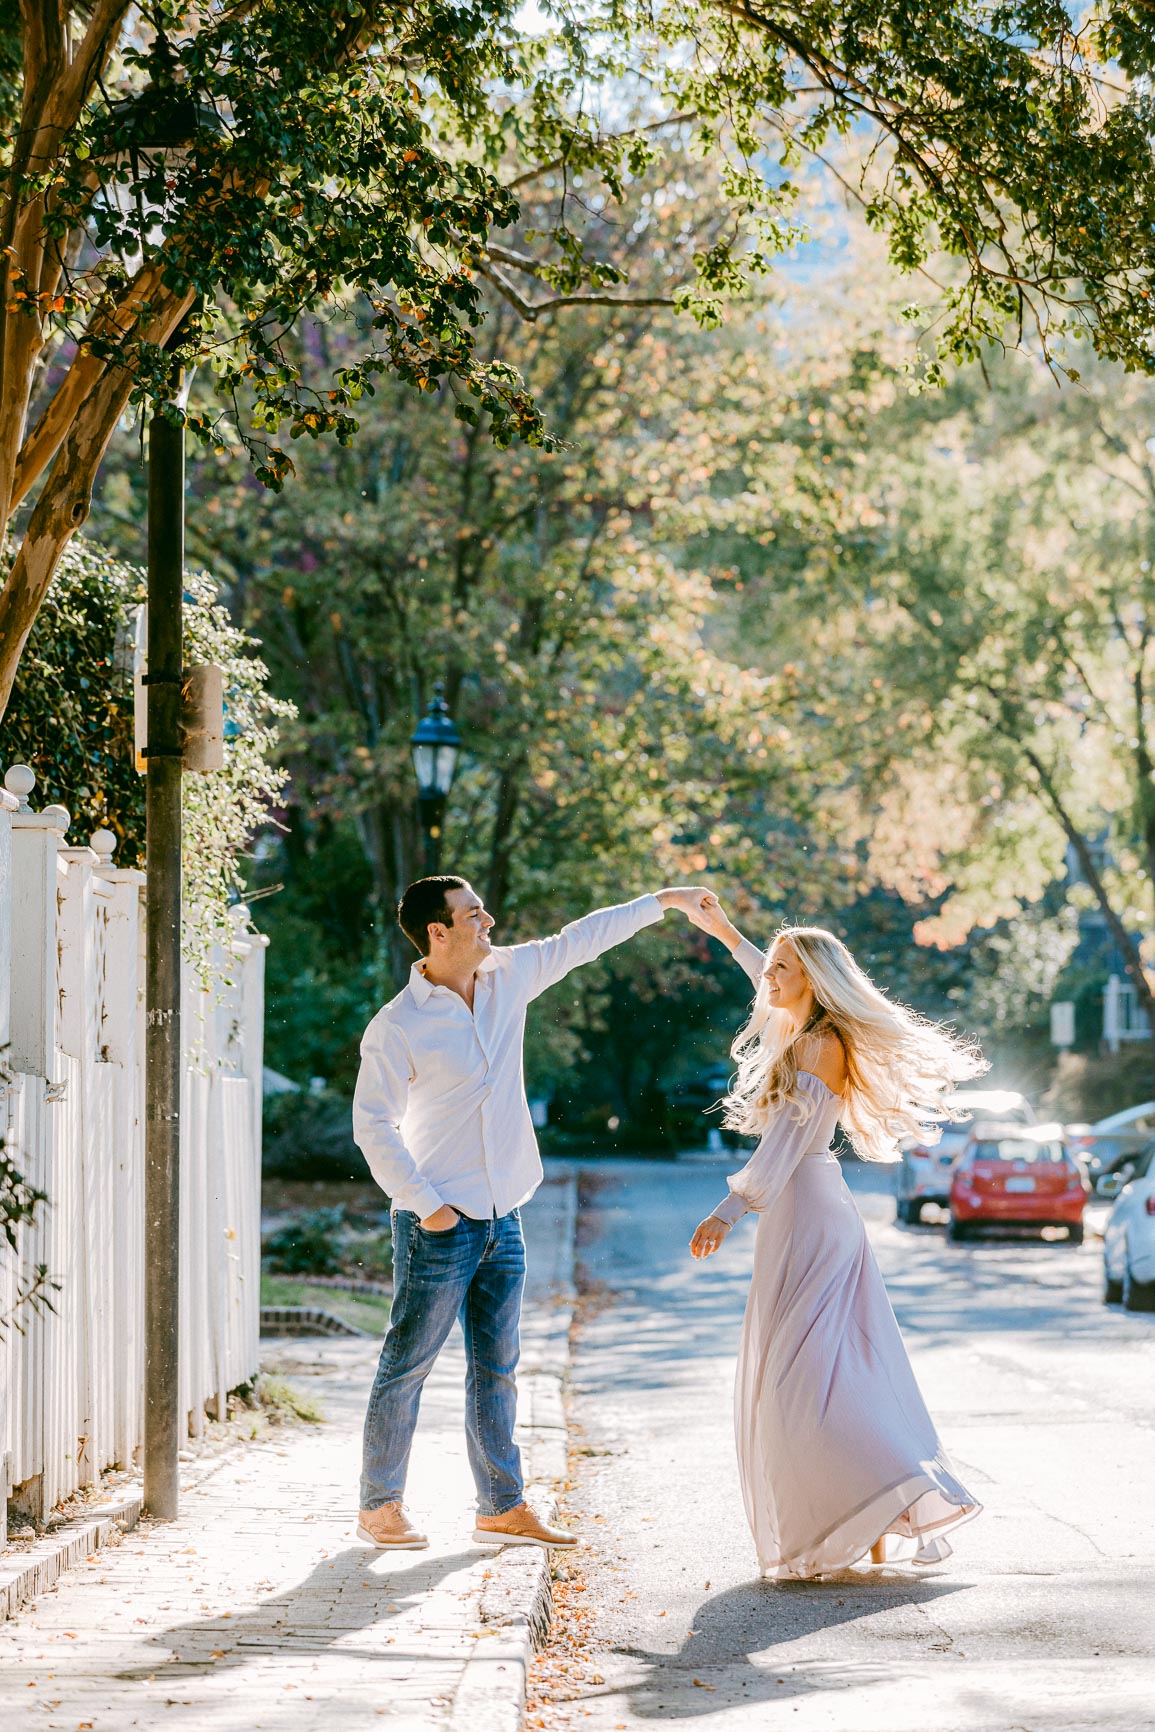 uptown's fourth ward engagement photo shot by Nhieu Tang Photography | nhieutang.com